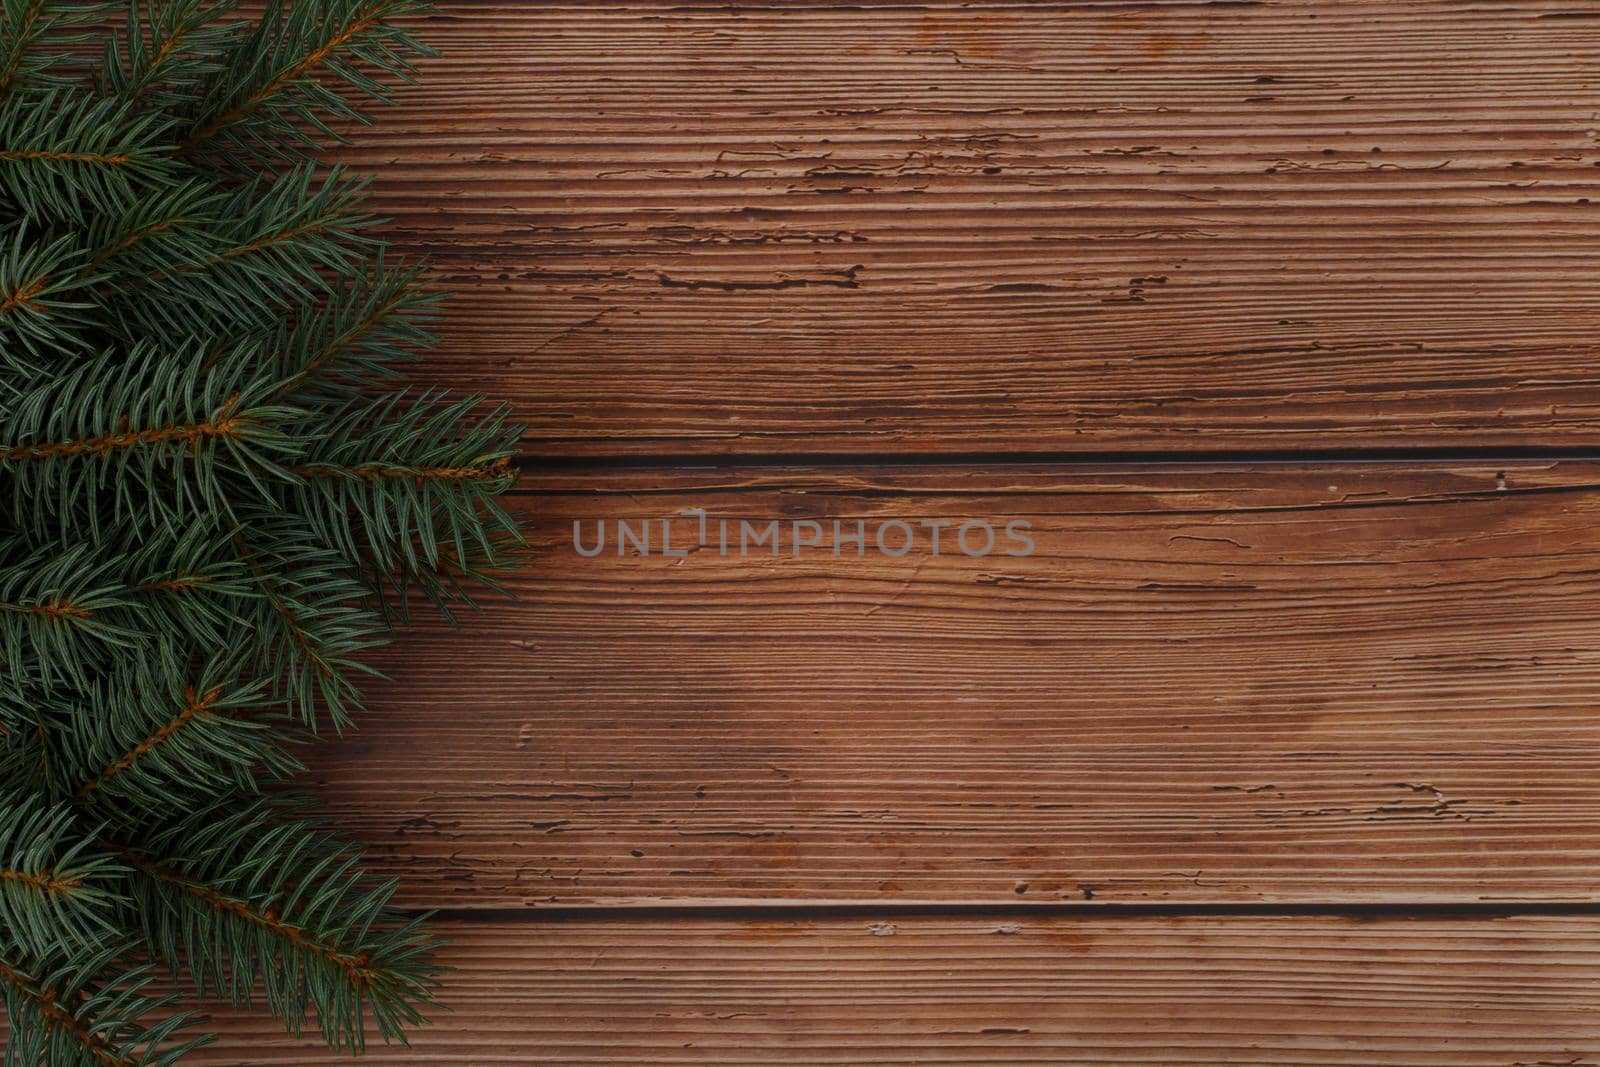 Dark brown wooden table with Christmas tree at the left side and space for text. The concept of New Year, Christmas and winter holidays. Horizontal photo, studio shot, no people